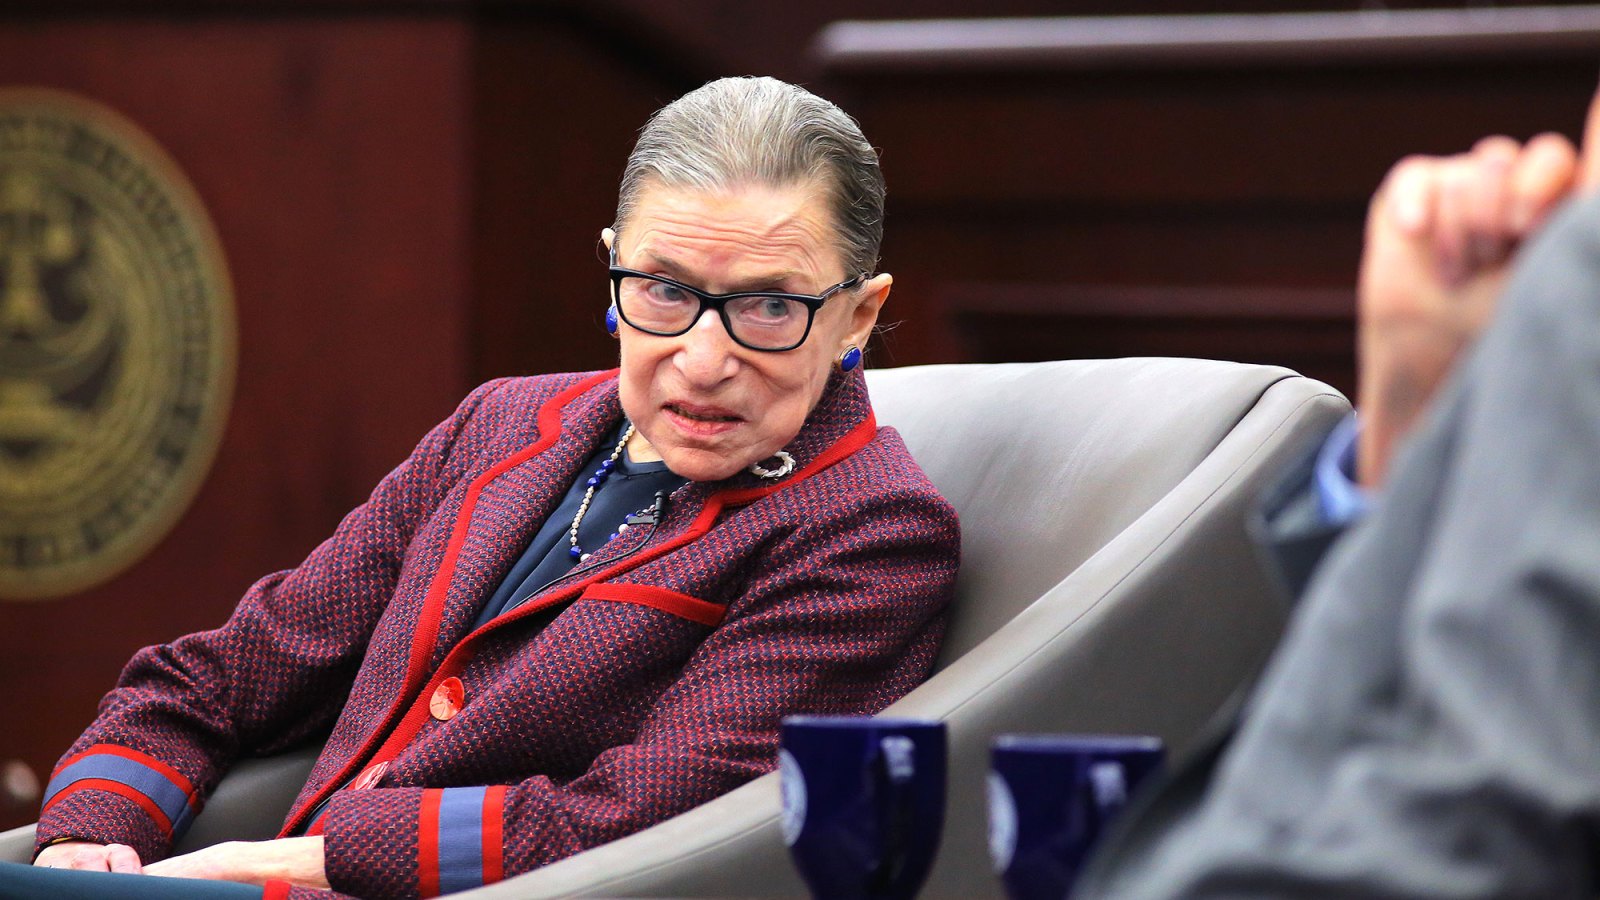 Supreme Court Justice Ruth Bader Ginsburg Undergoes Surgery to Remove Cancerous Growths